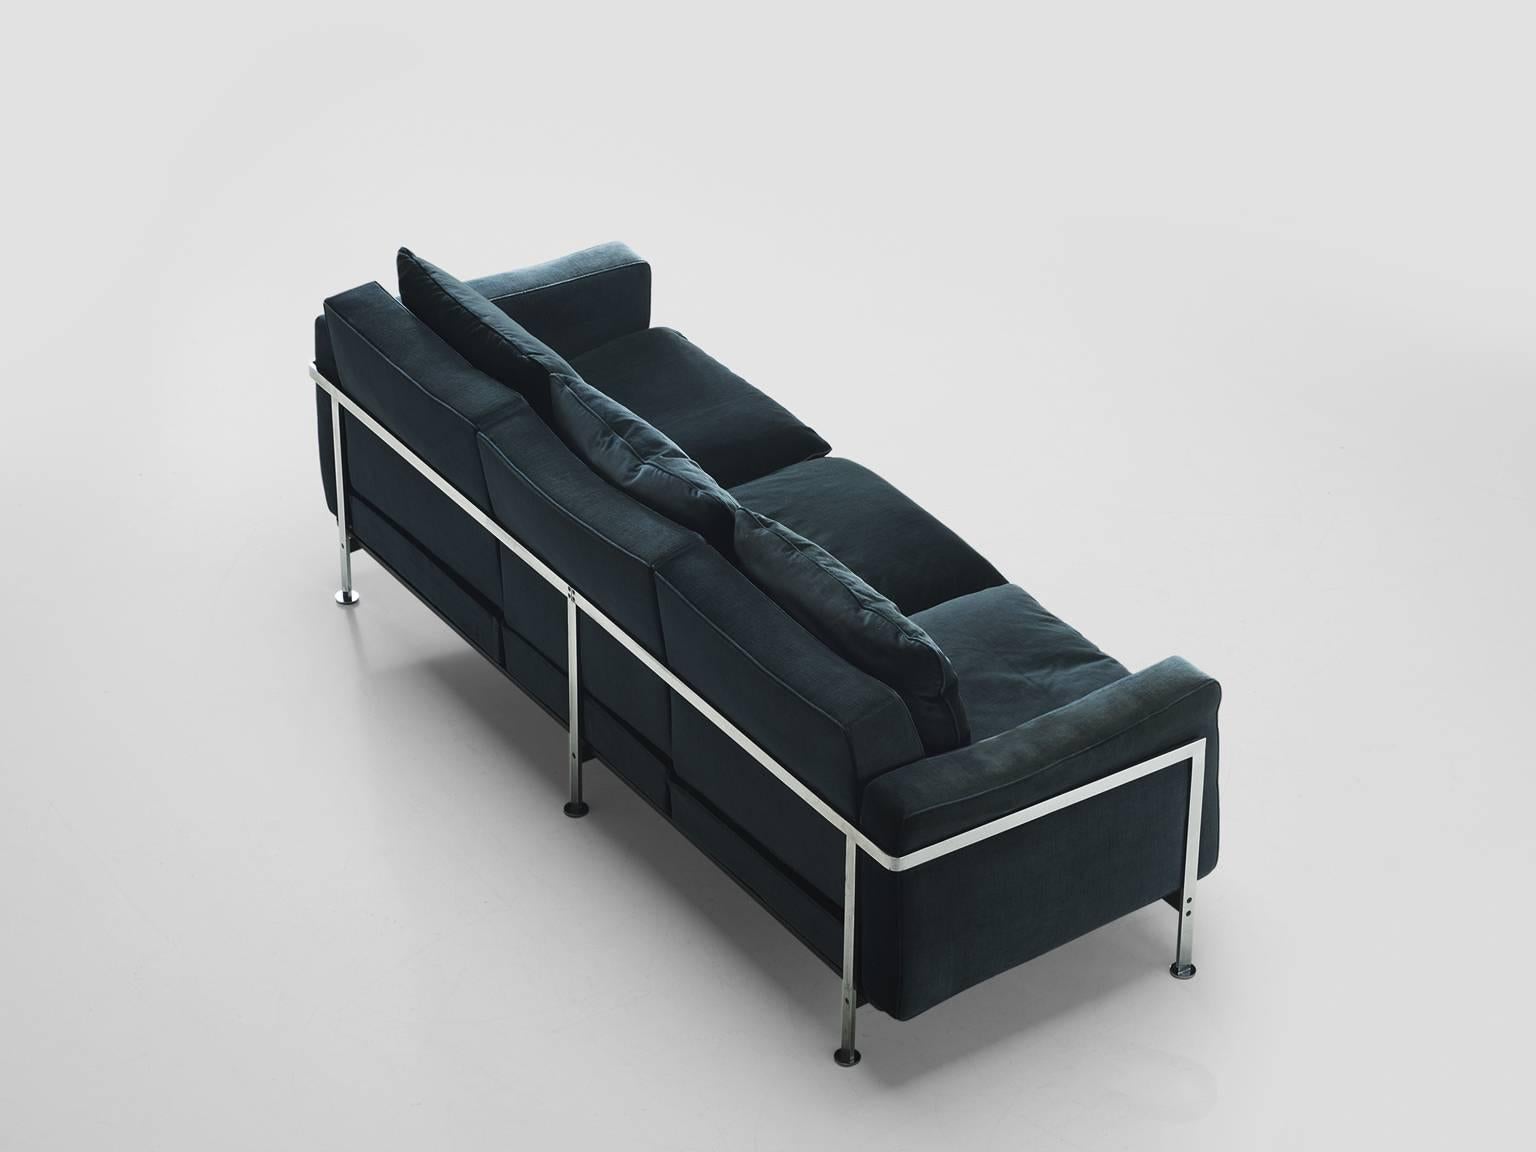 Sofa in blue velvet by Robert Hausmann for De Sede, Switzerland,1954.

This comfortable velvet sofa is designed with a chromed iron frame that functions as a basket for the cushions on the inside. The thick back and seat cushion provide an excellent